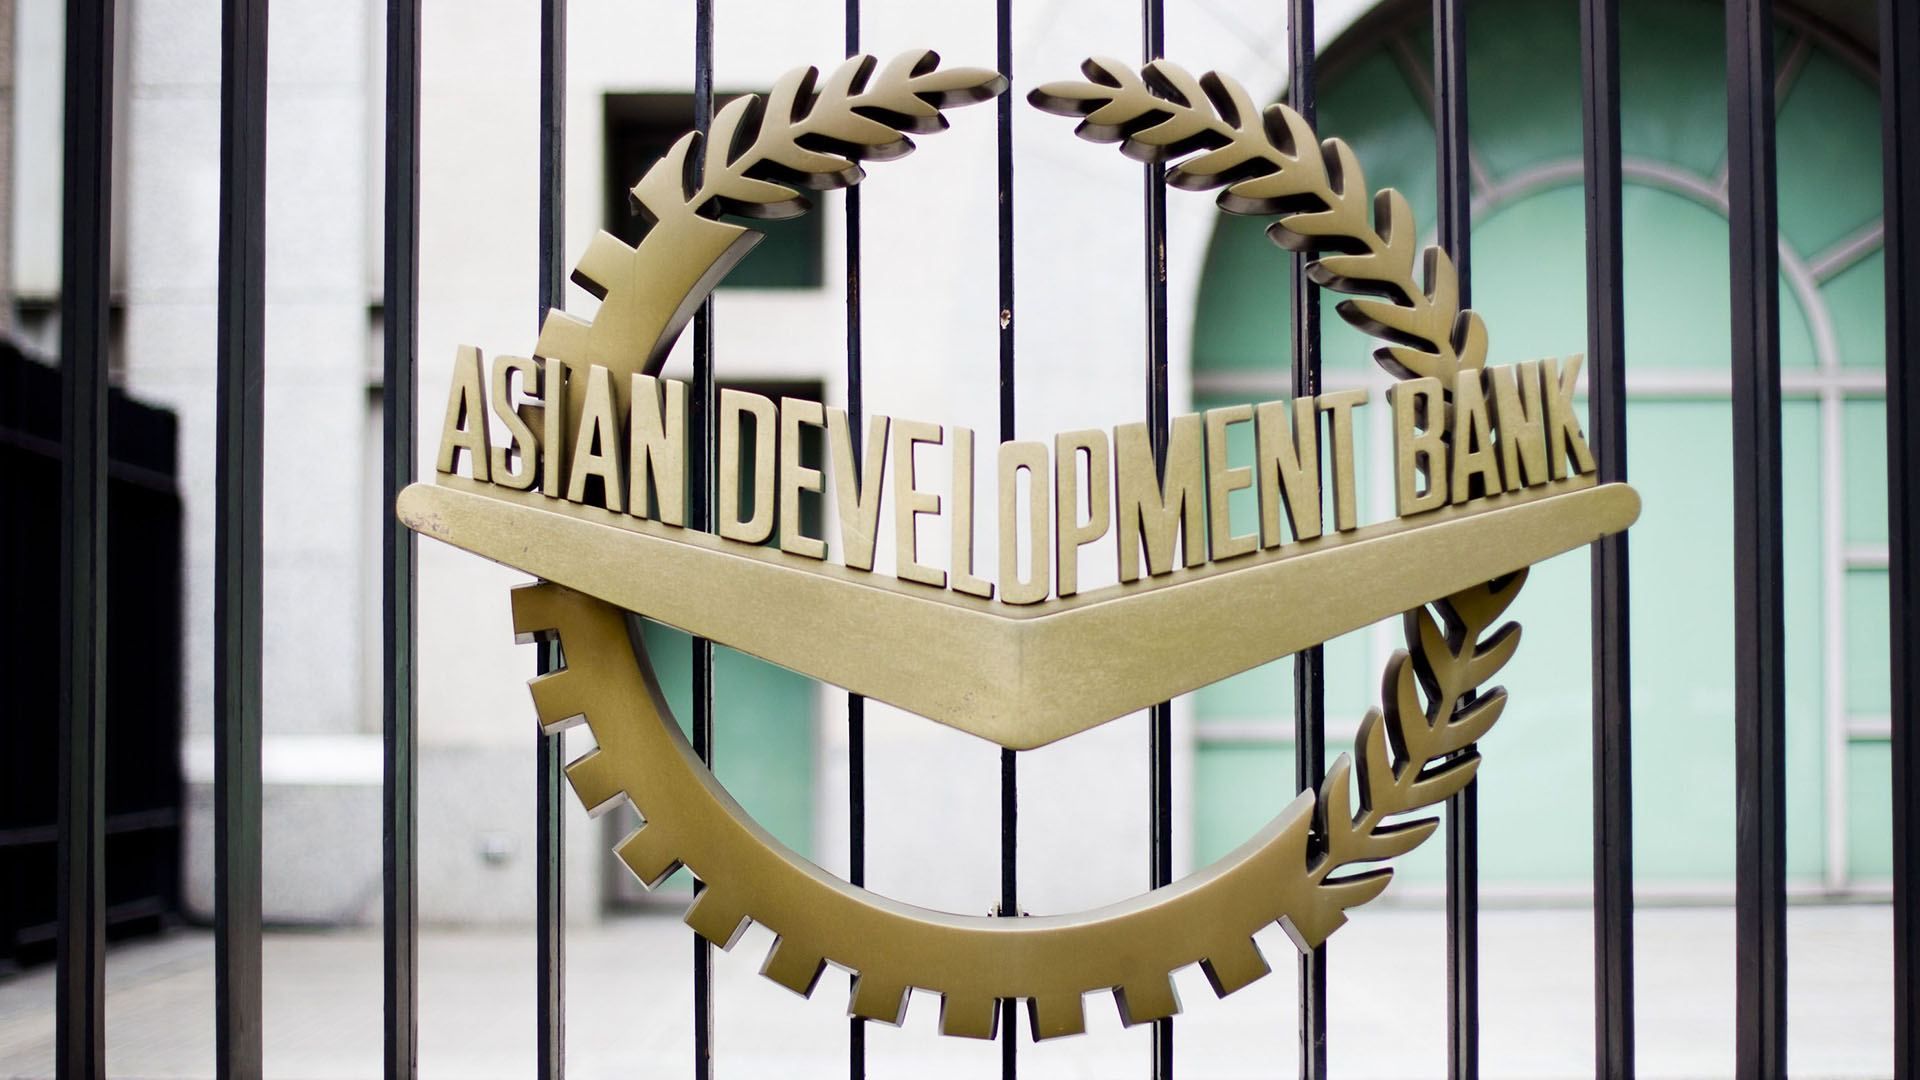 13 billion rupees loan approved by ADB for Nepal